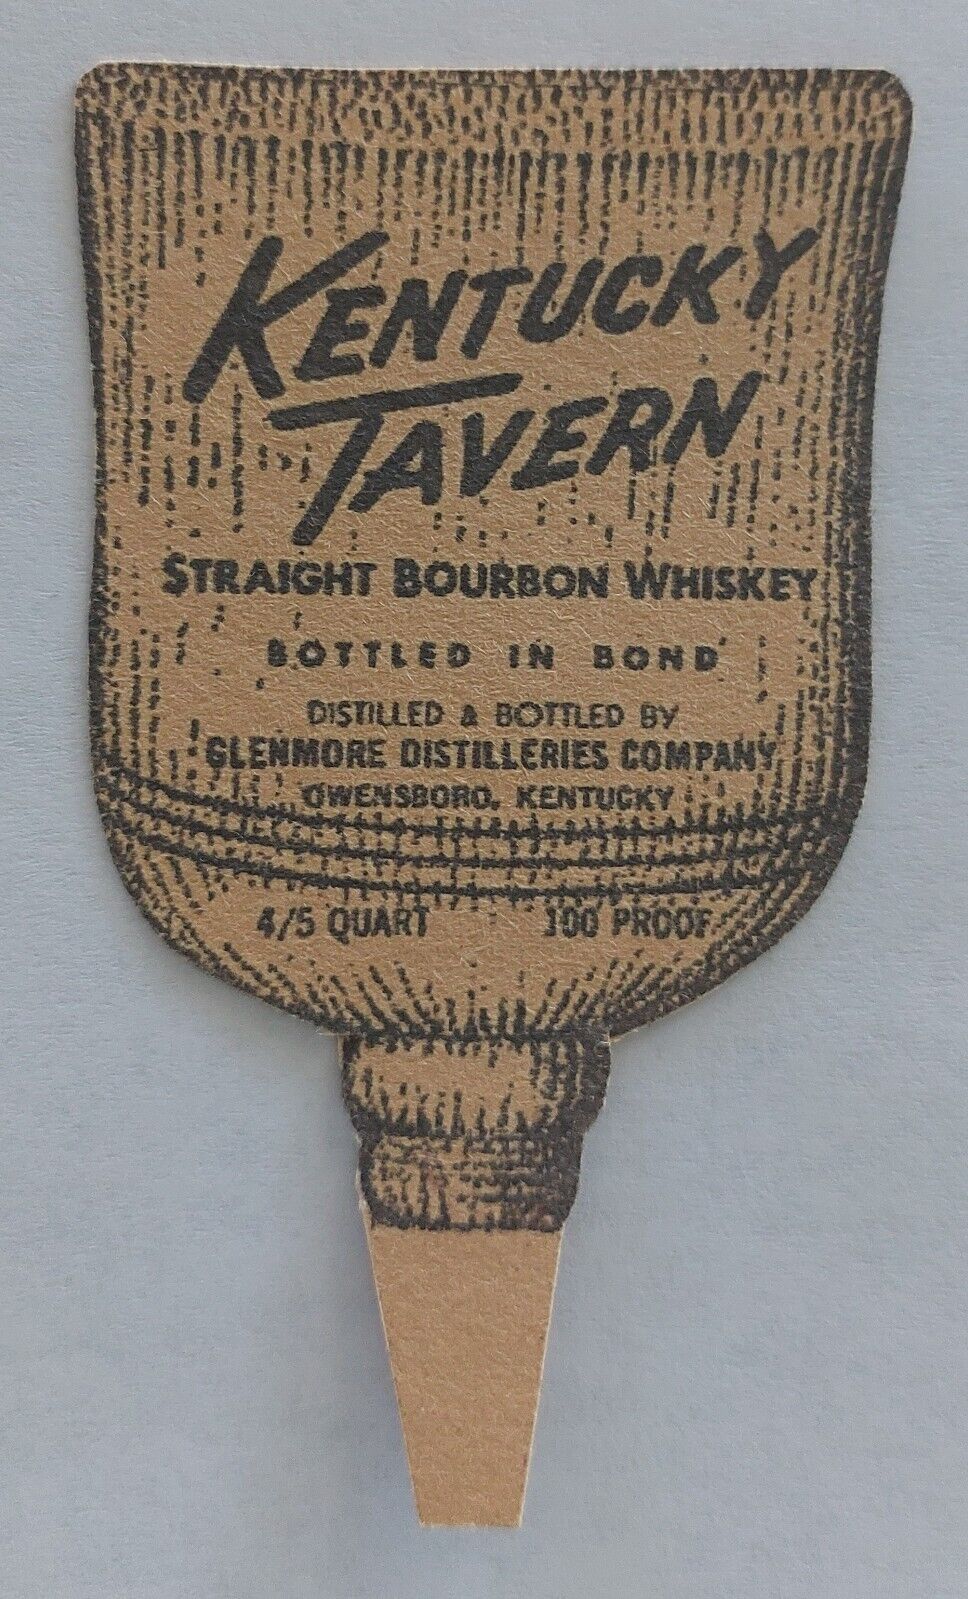 KENTUCKY TAVERN SNOWMAN Reproduction Broom on OLD PAPER